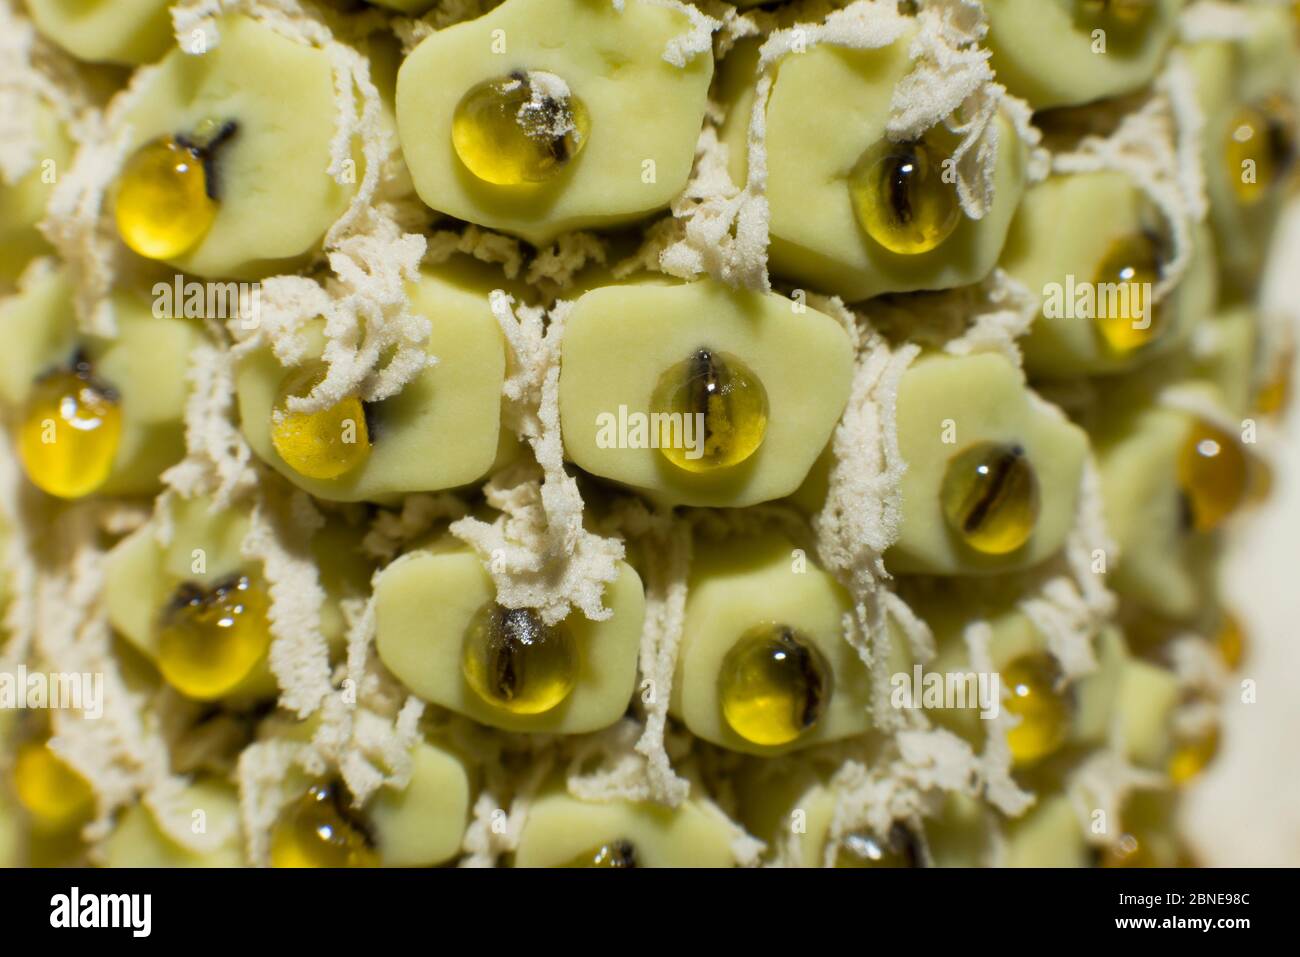 Swiss cheese plant (Monstera deliciosa) in flower, close up of spadix. Stock Photo